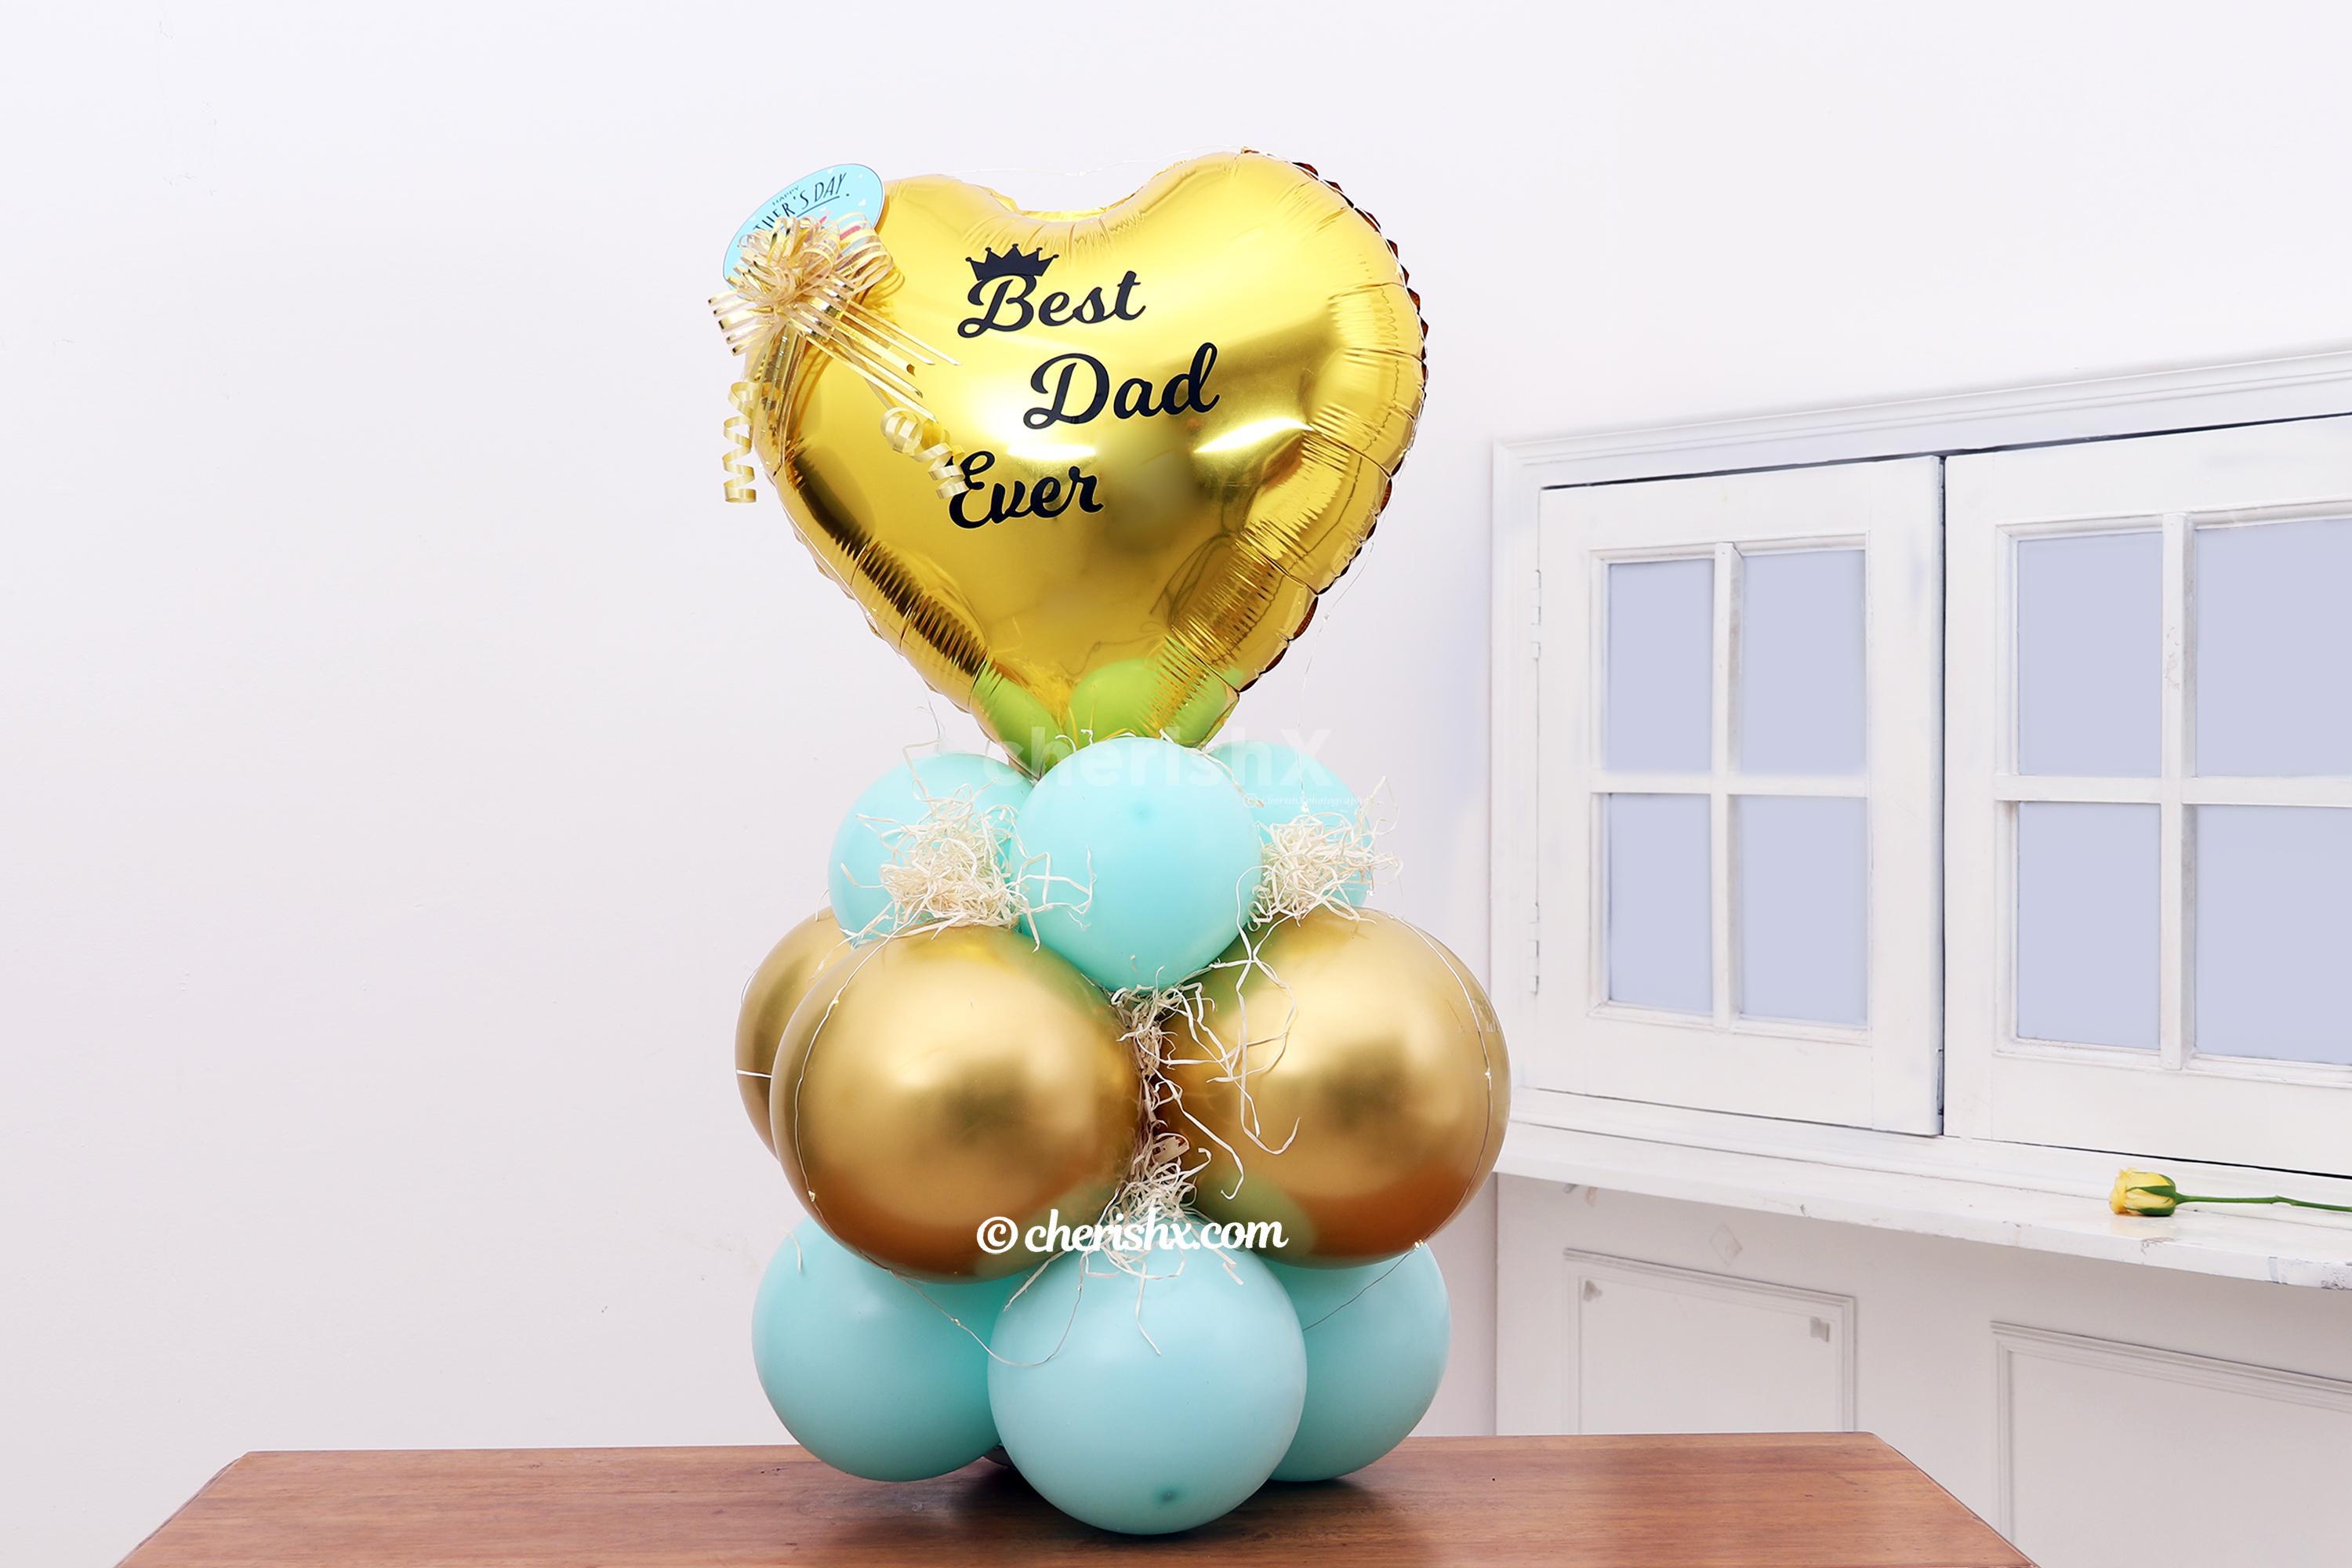 Happy Father's Day Message is also sticked to the heart-shaped Golden Foil Balloon.